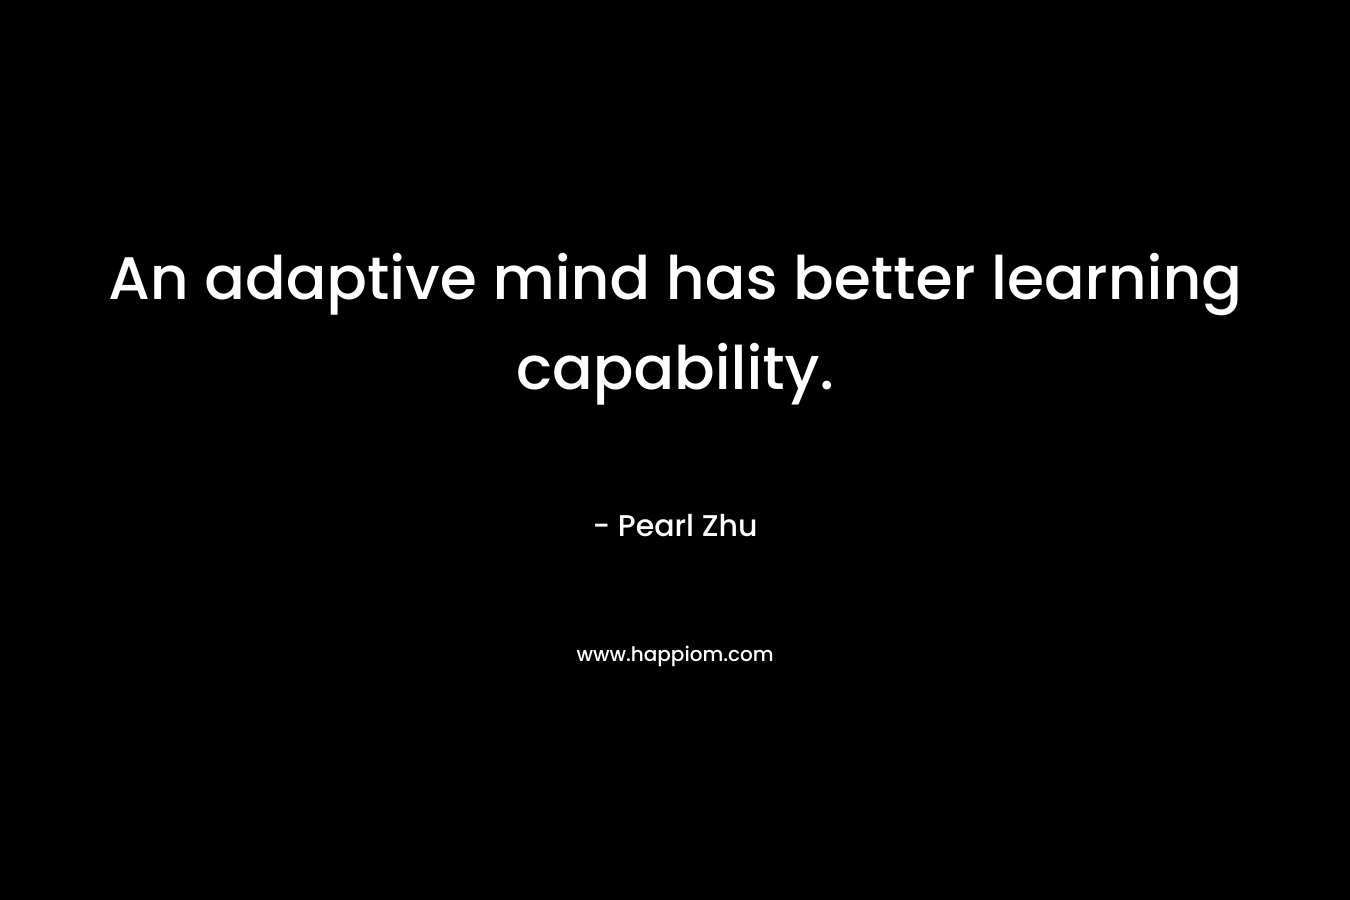 An adaptive mind has better learning capability. – Pearl Zhu